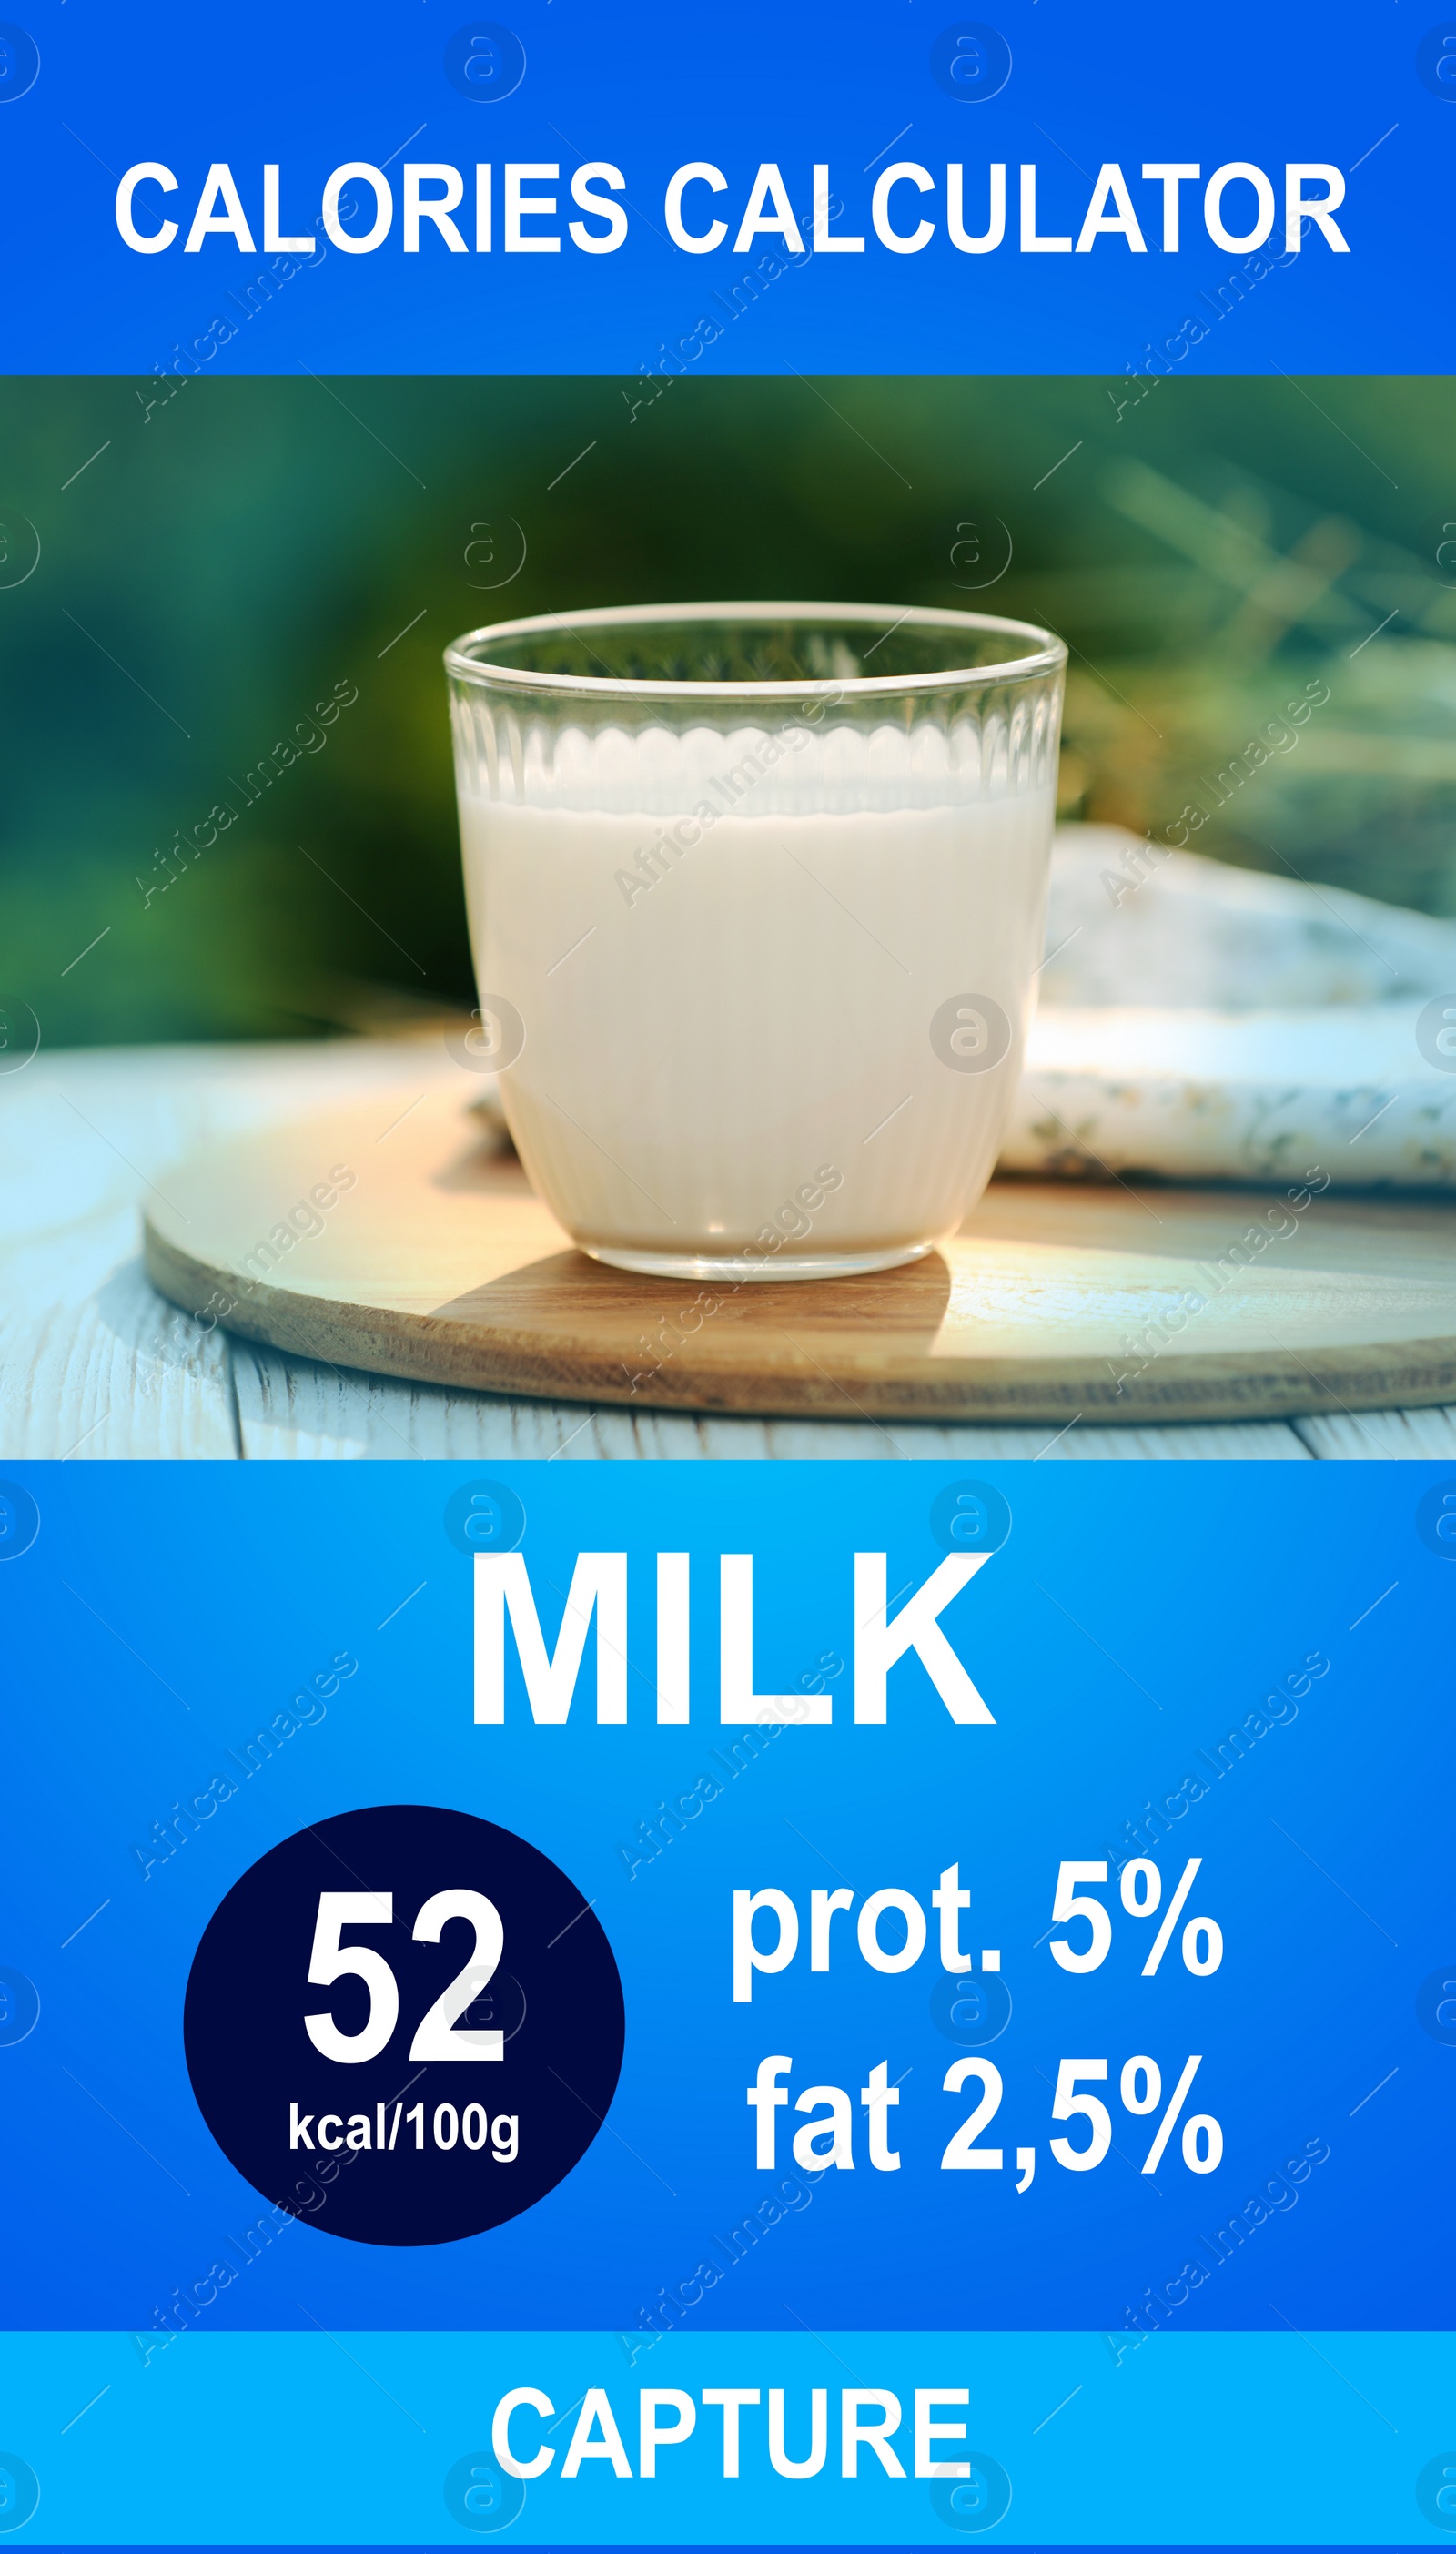 Image of Weight loss concept. Calories calculator app with image of milk and its caloric content